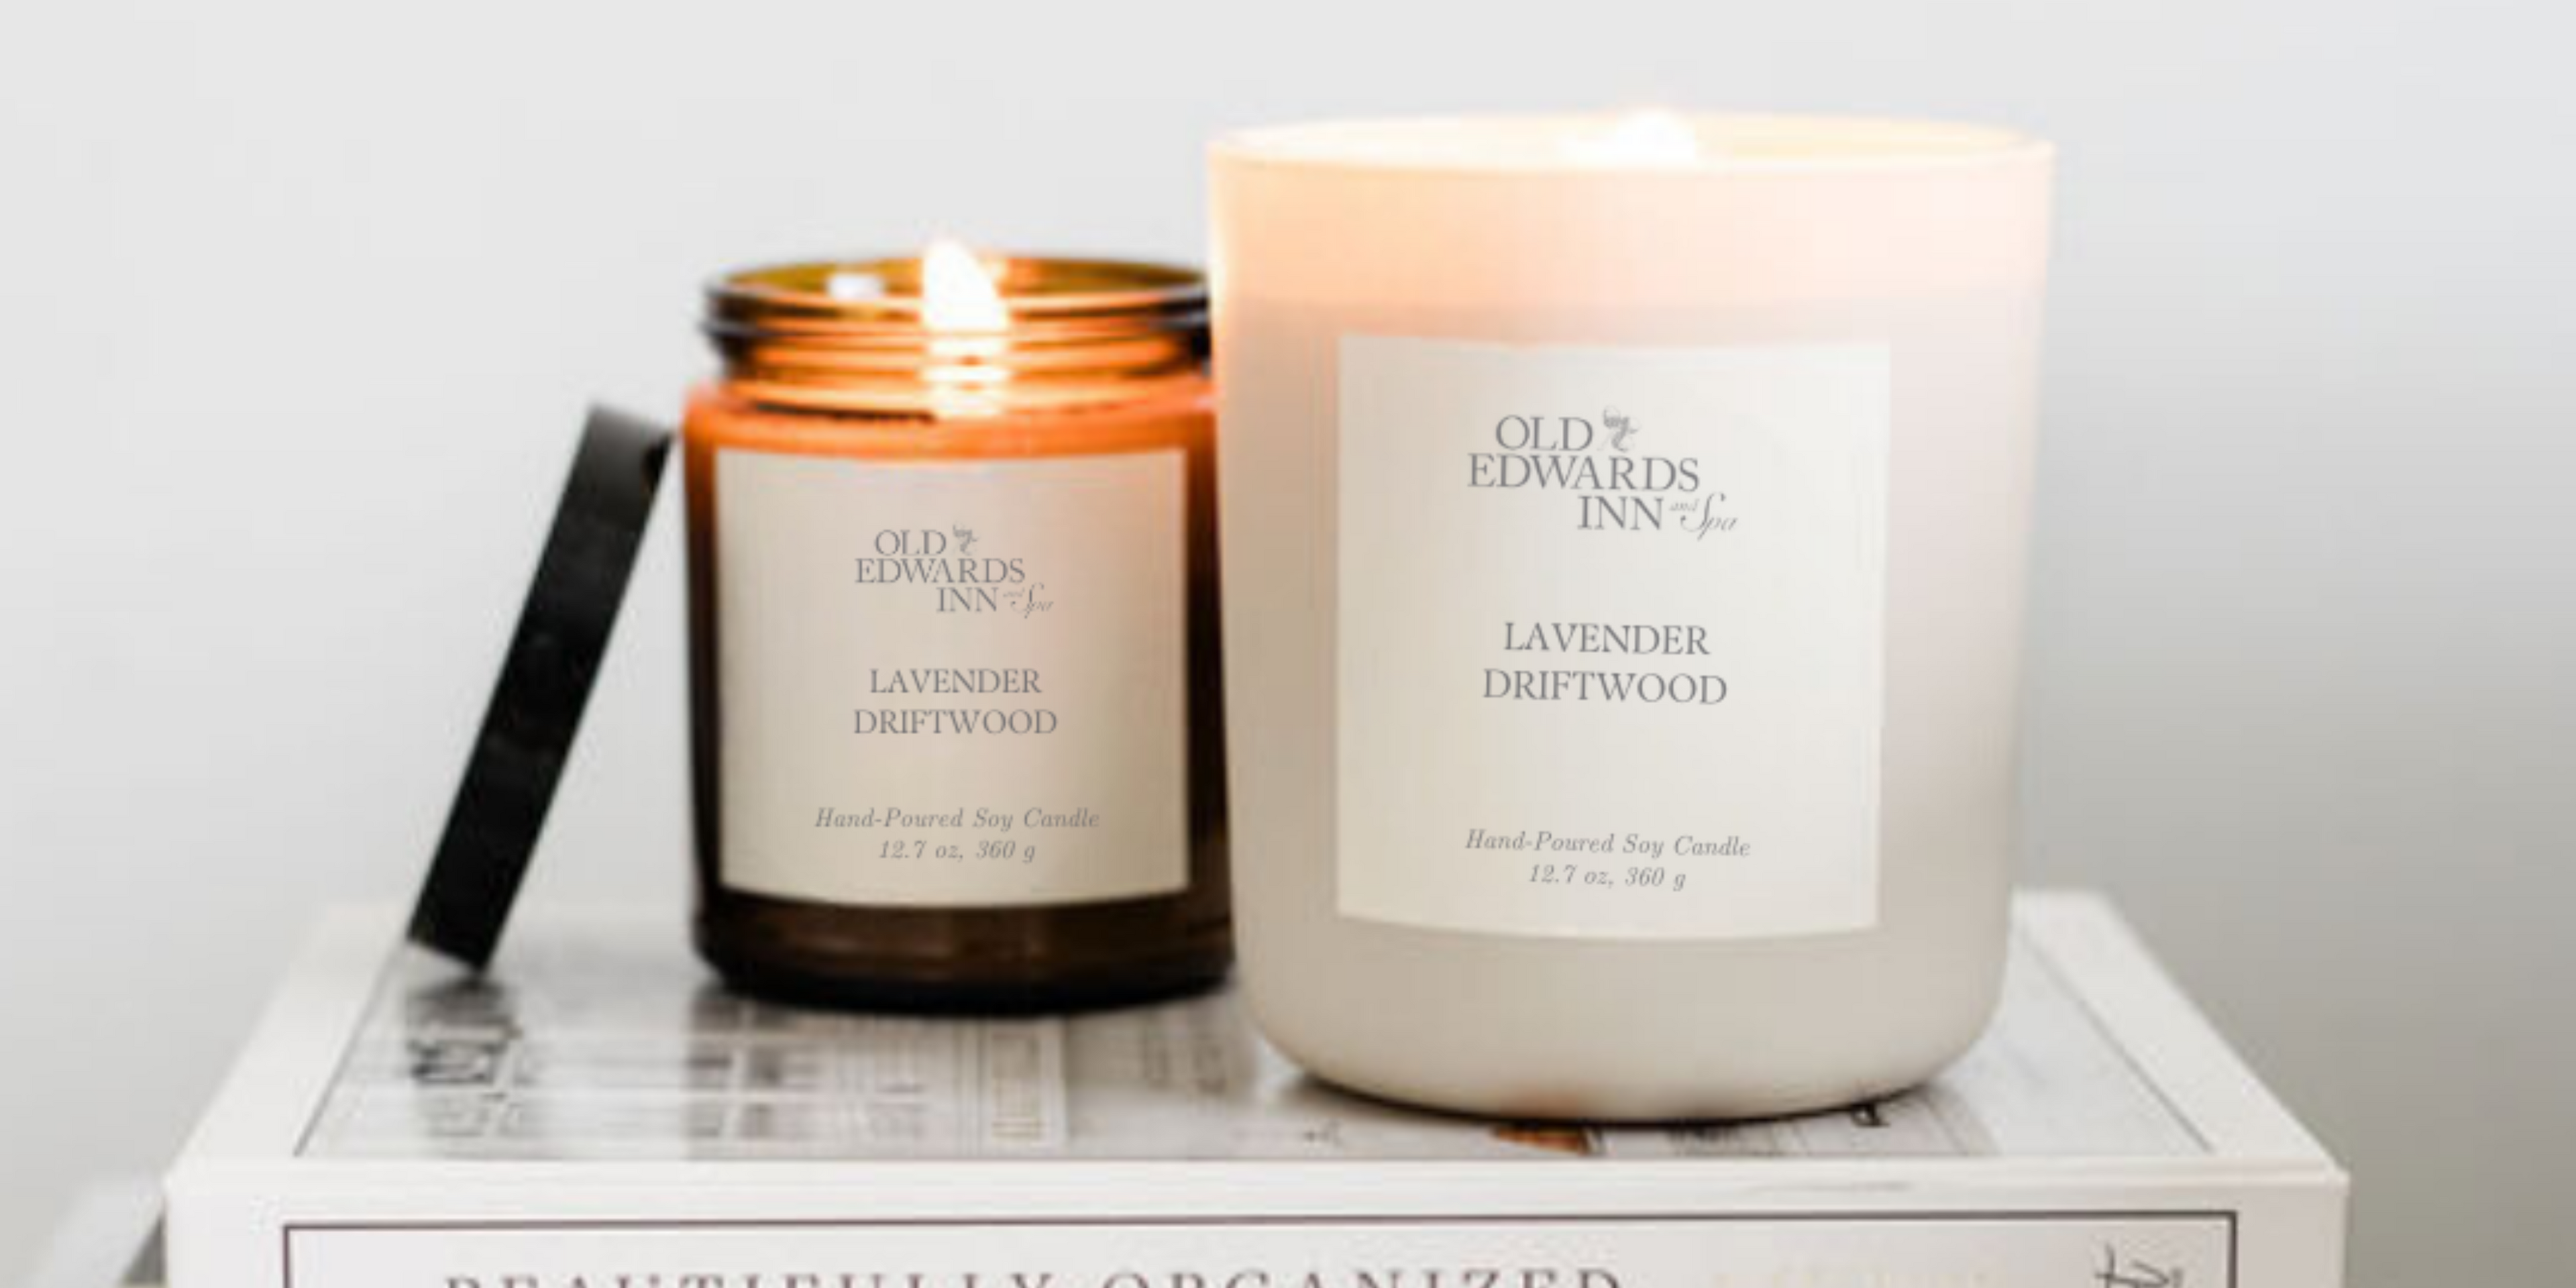 Luxury private label candles made in the USA